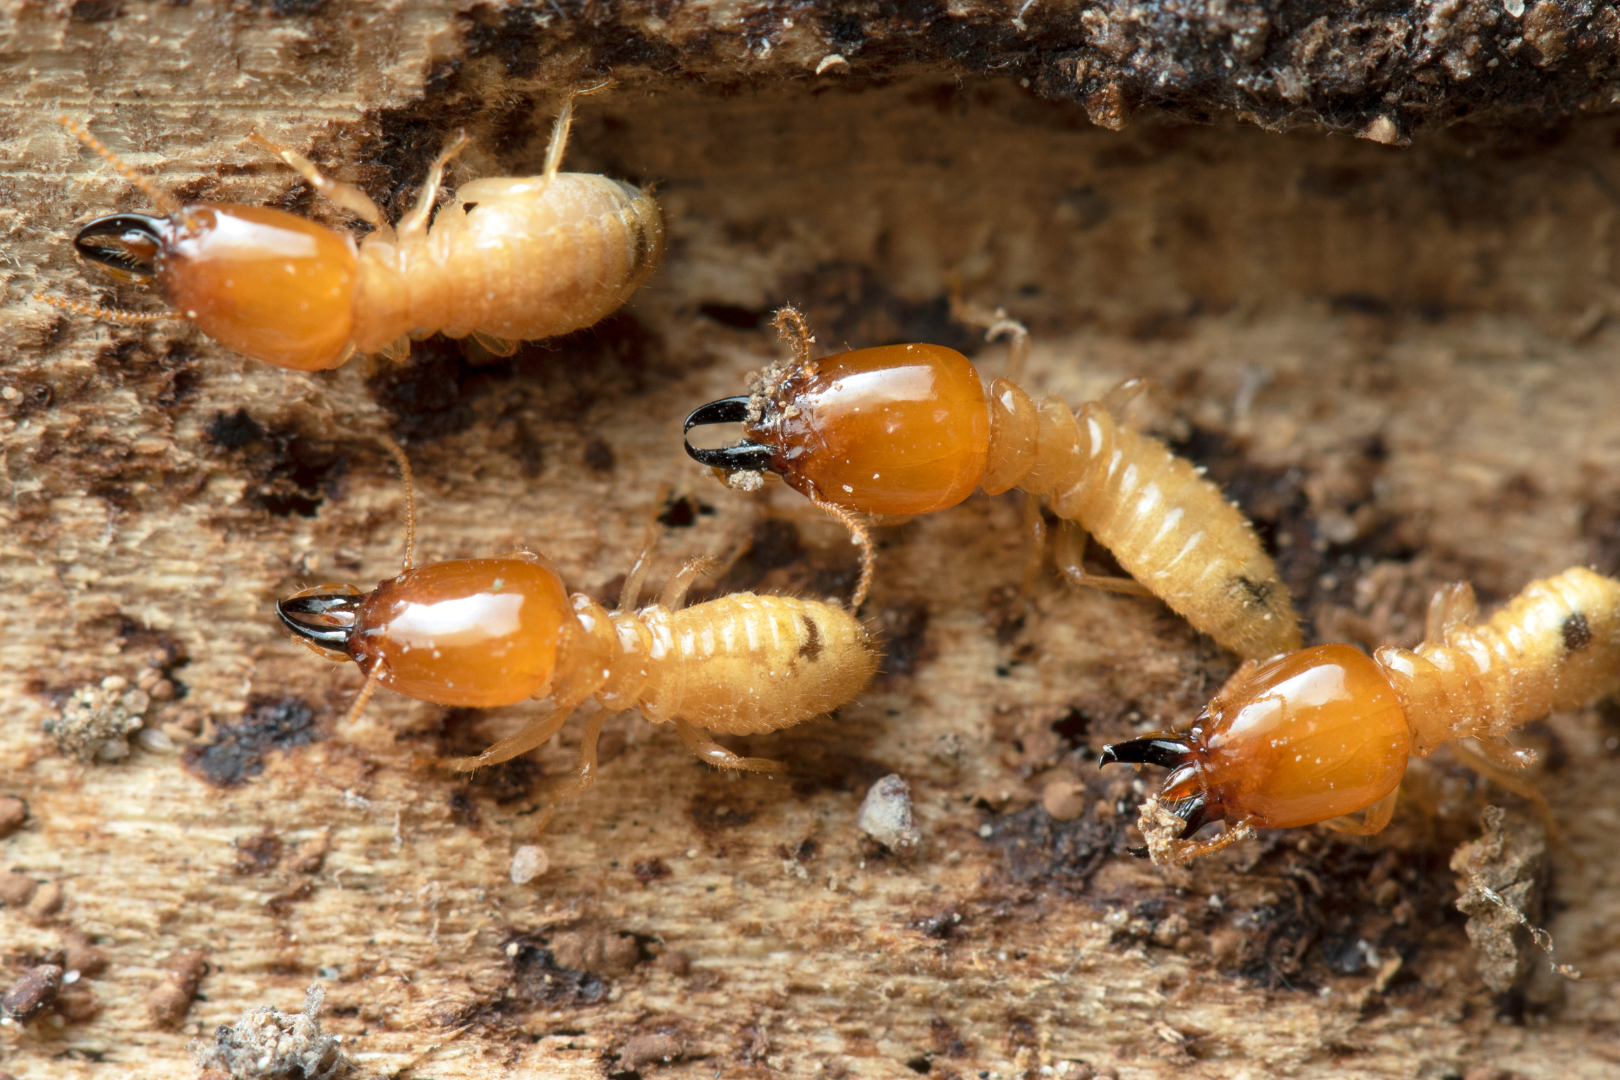 Termites are some of the most common household pests